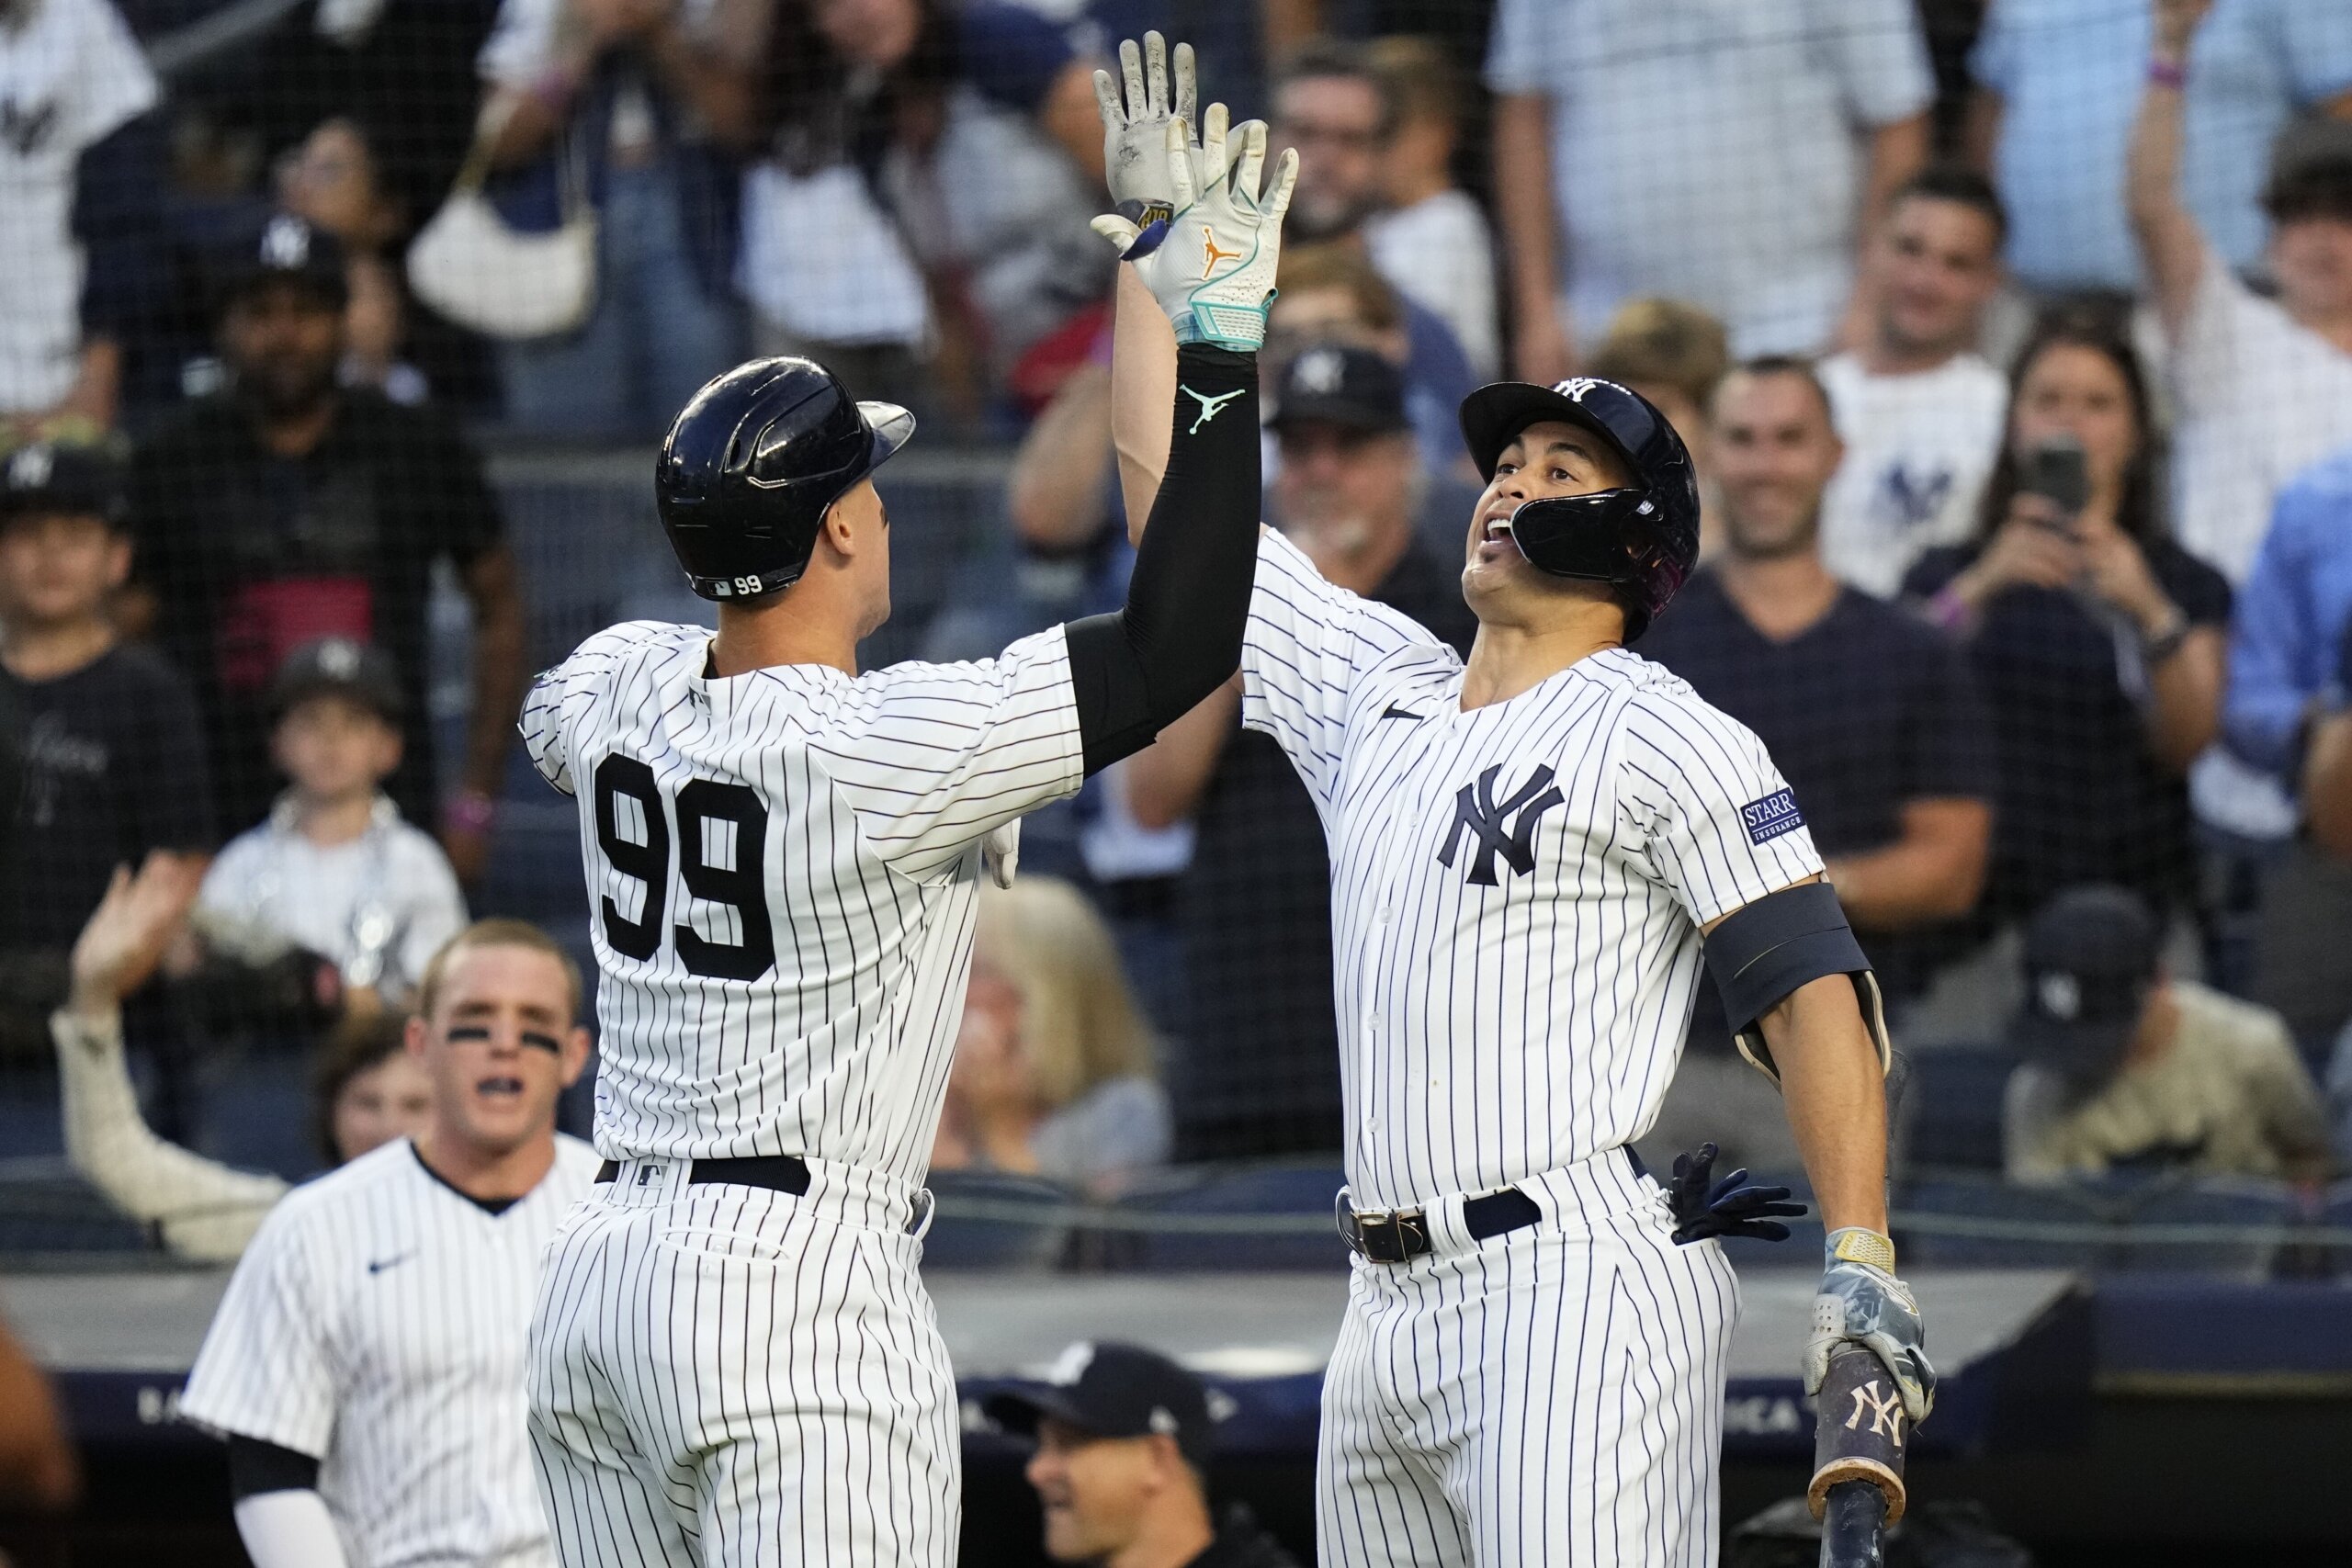 Aaron Judge (3 HRs), Yankees crush Nats to end 9-game skid